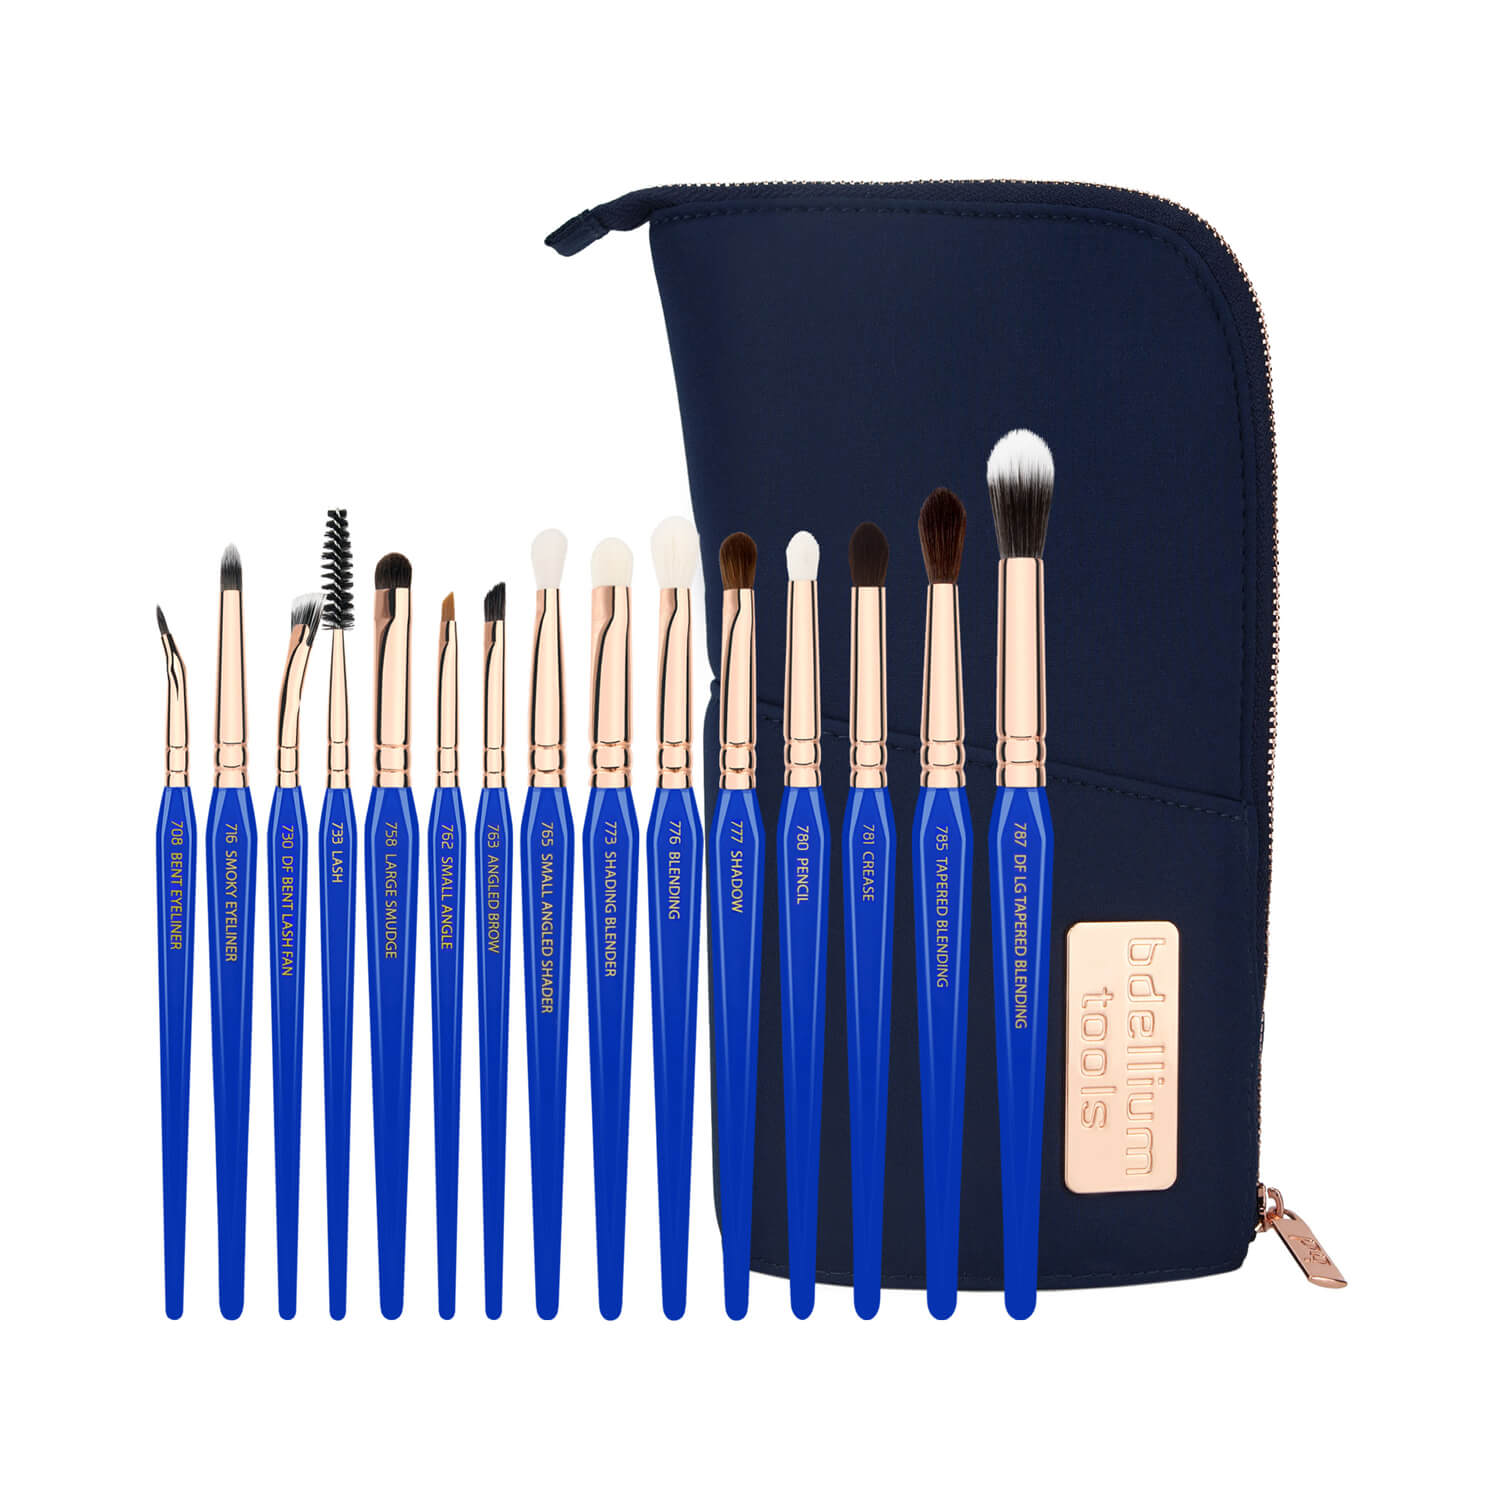 BDellium Tools Golden Triangle Eyes Only Complete 15pc Brush Set With Pouch